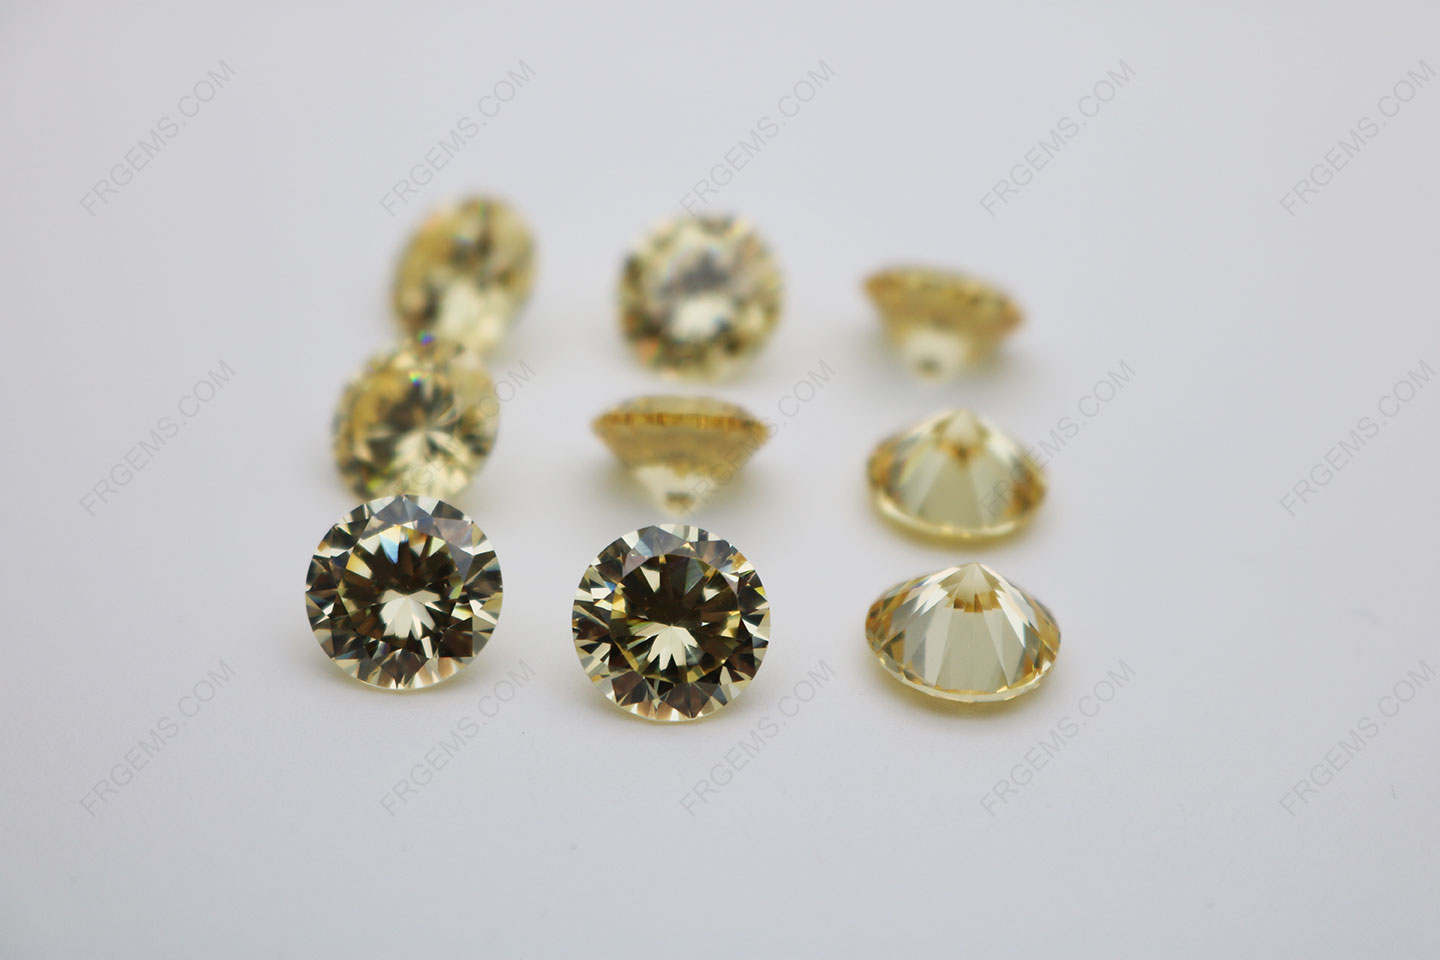 Cubic Zirconia Canary Yellow Round Diamond faceted Cut 10mm stones CZ06 IMG_0239